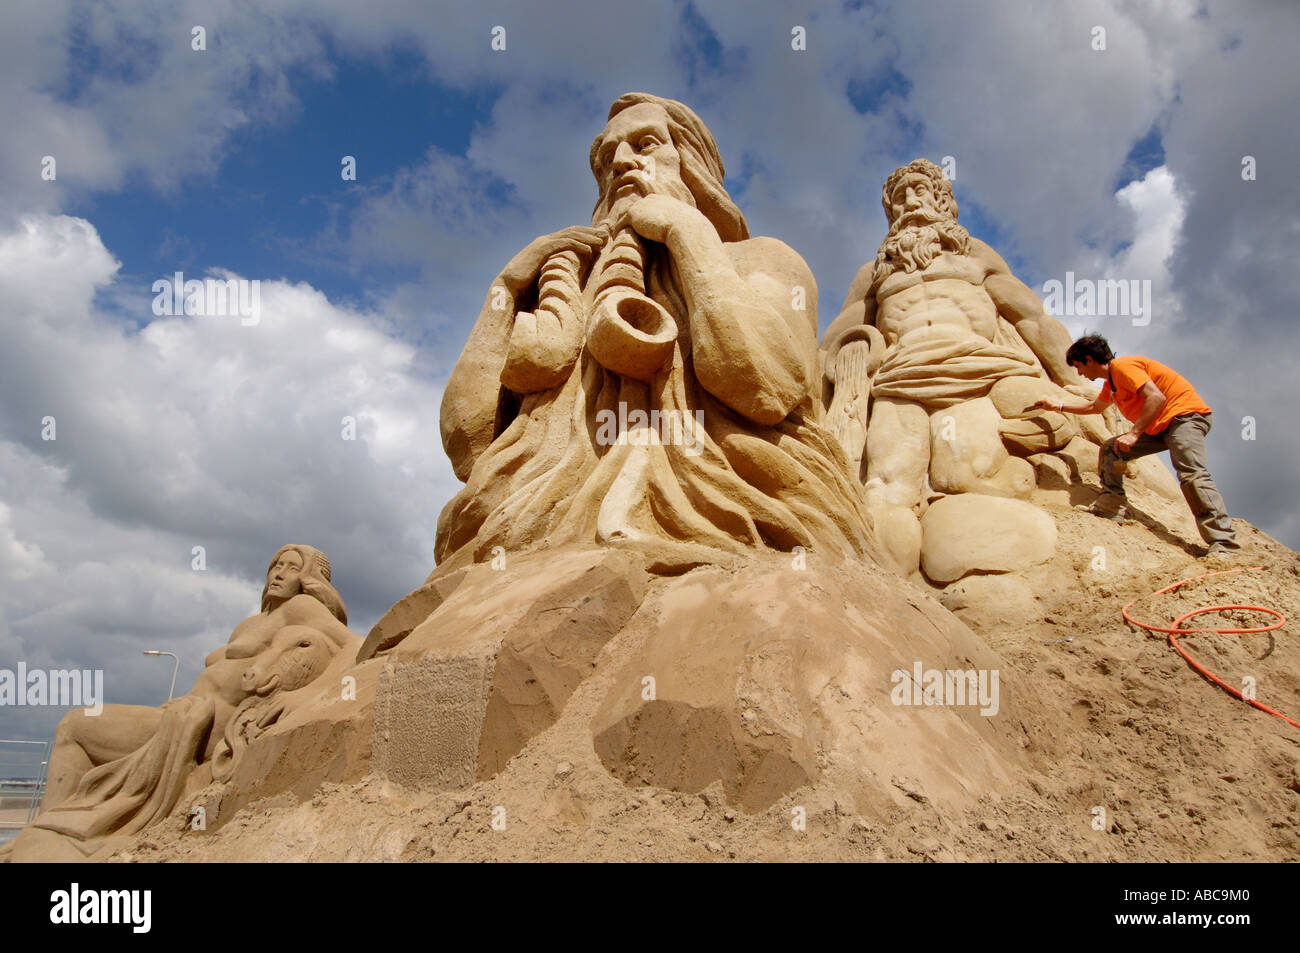 A sand sculptor creates a figures of musicians as part of a display based on the Roman Empire Stock Photo